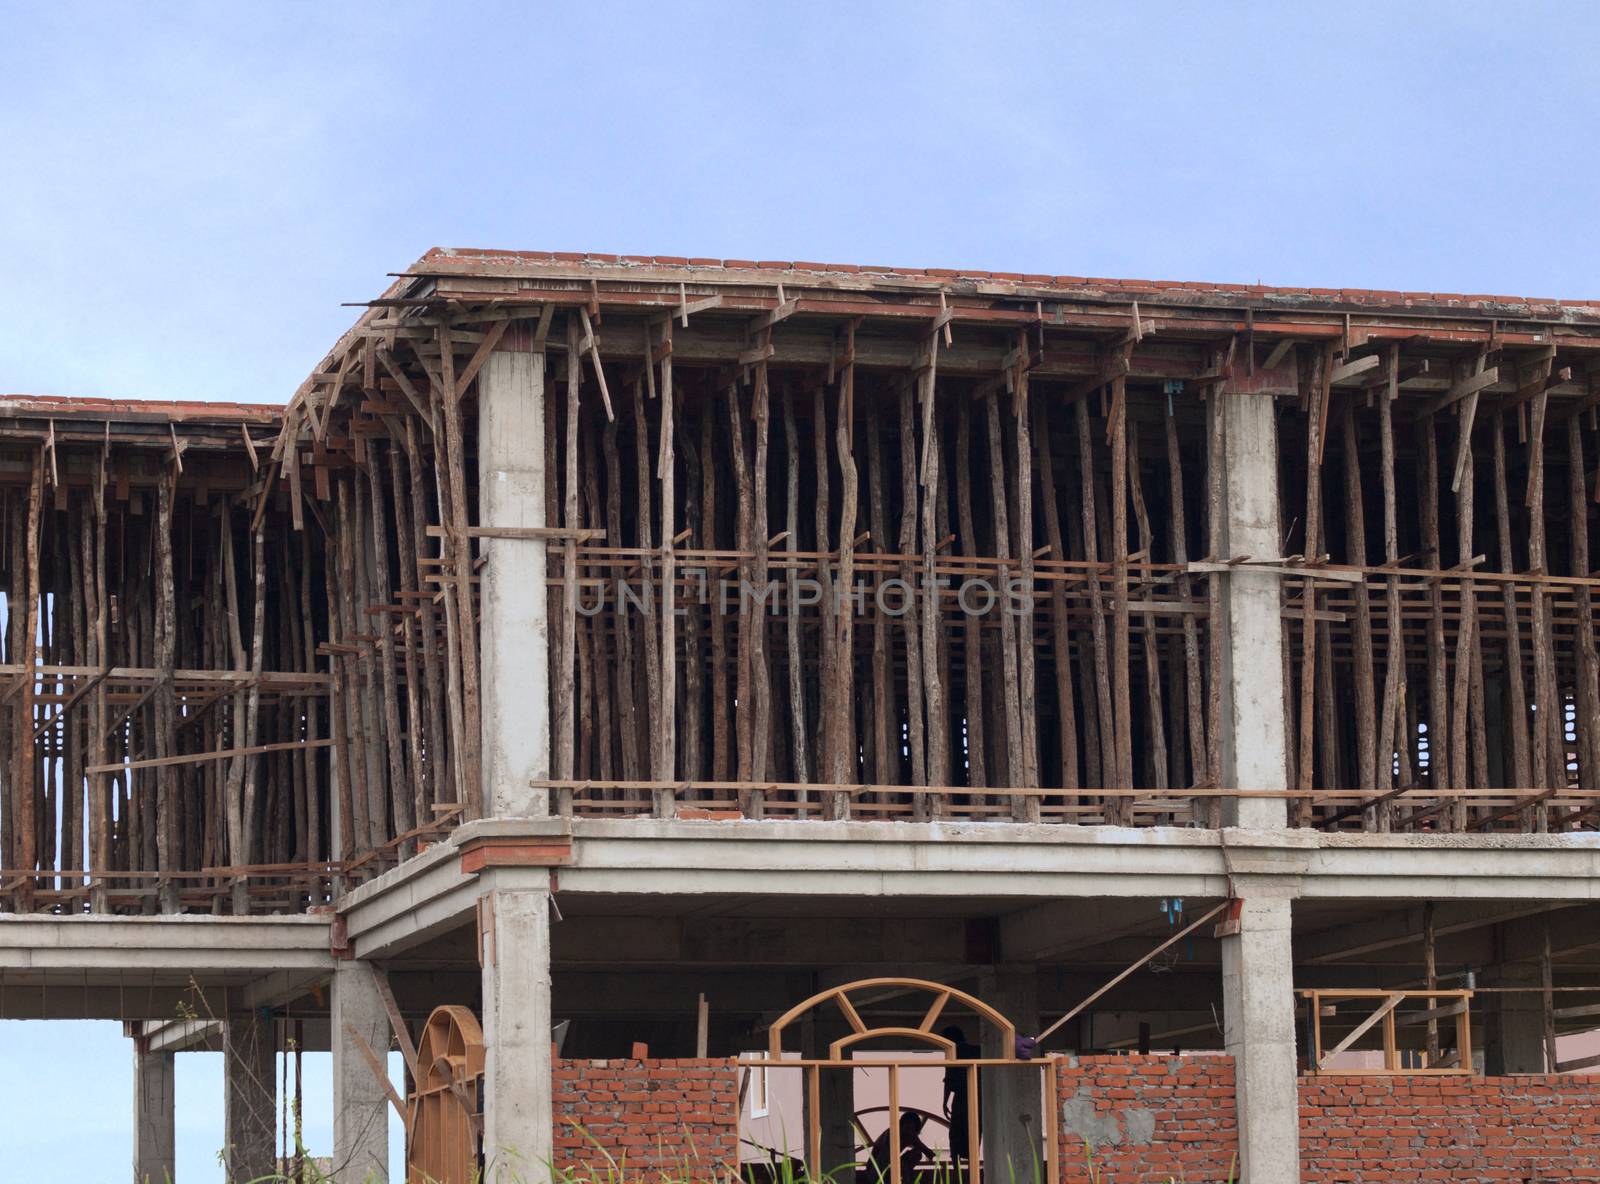 BUILDING UNDER CONSTRUCTION WITH SUPPORTING TIMBERS IN MYANMAR